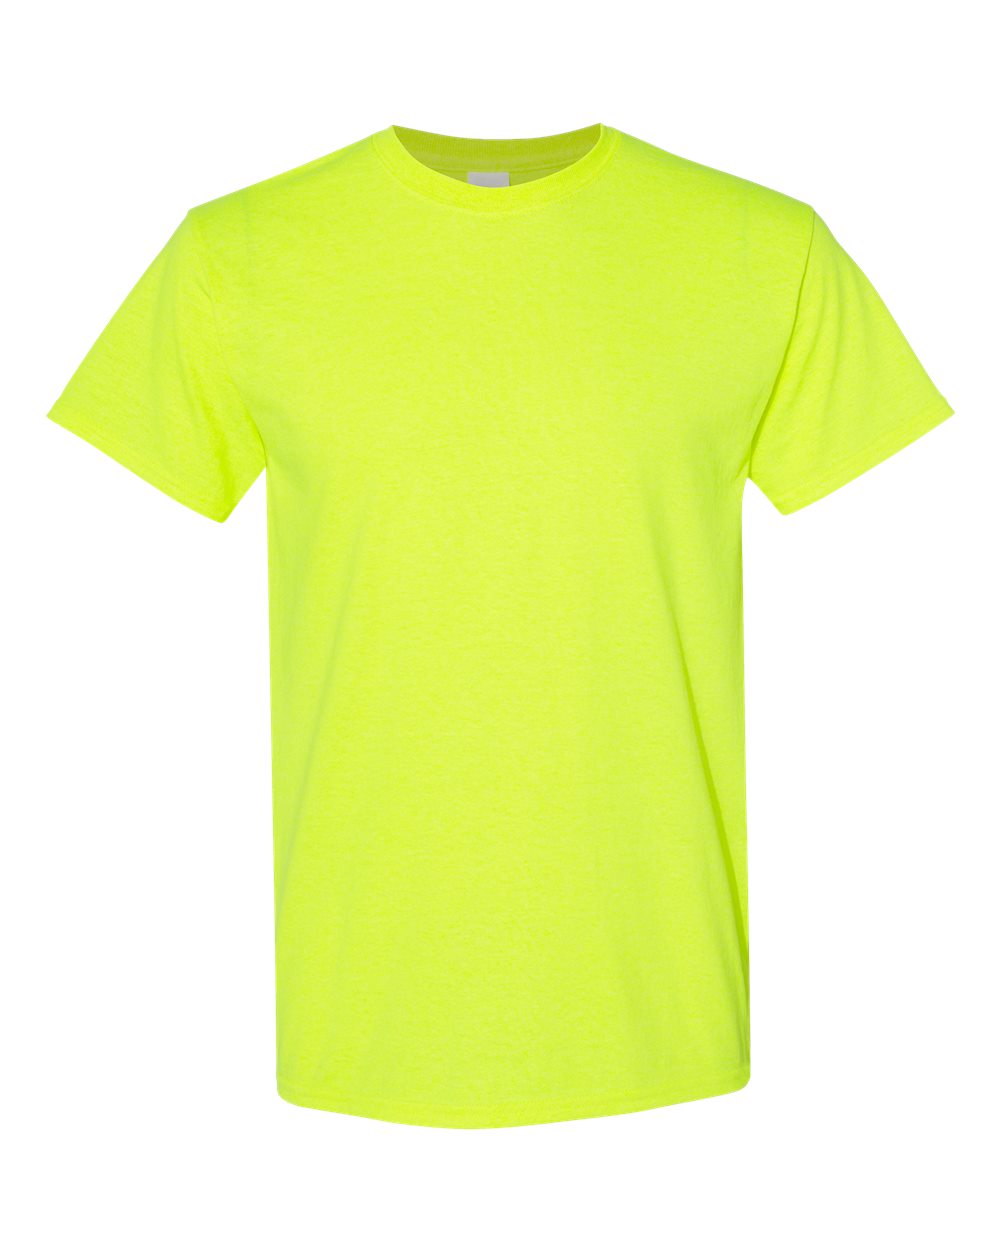  Custom Basketball Performance Shirt, Personalized Basketball  Warm Up Dri Fit T-Shirt, Add Your Team Name, Youth & Adult Sizes Available  (Adult Small, SAFETY YELLOW) (KELLY GREEN) : Handmade Products